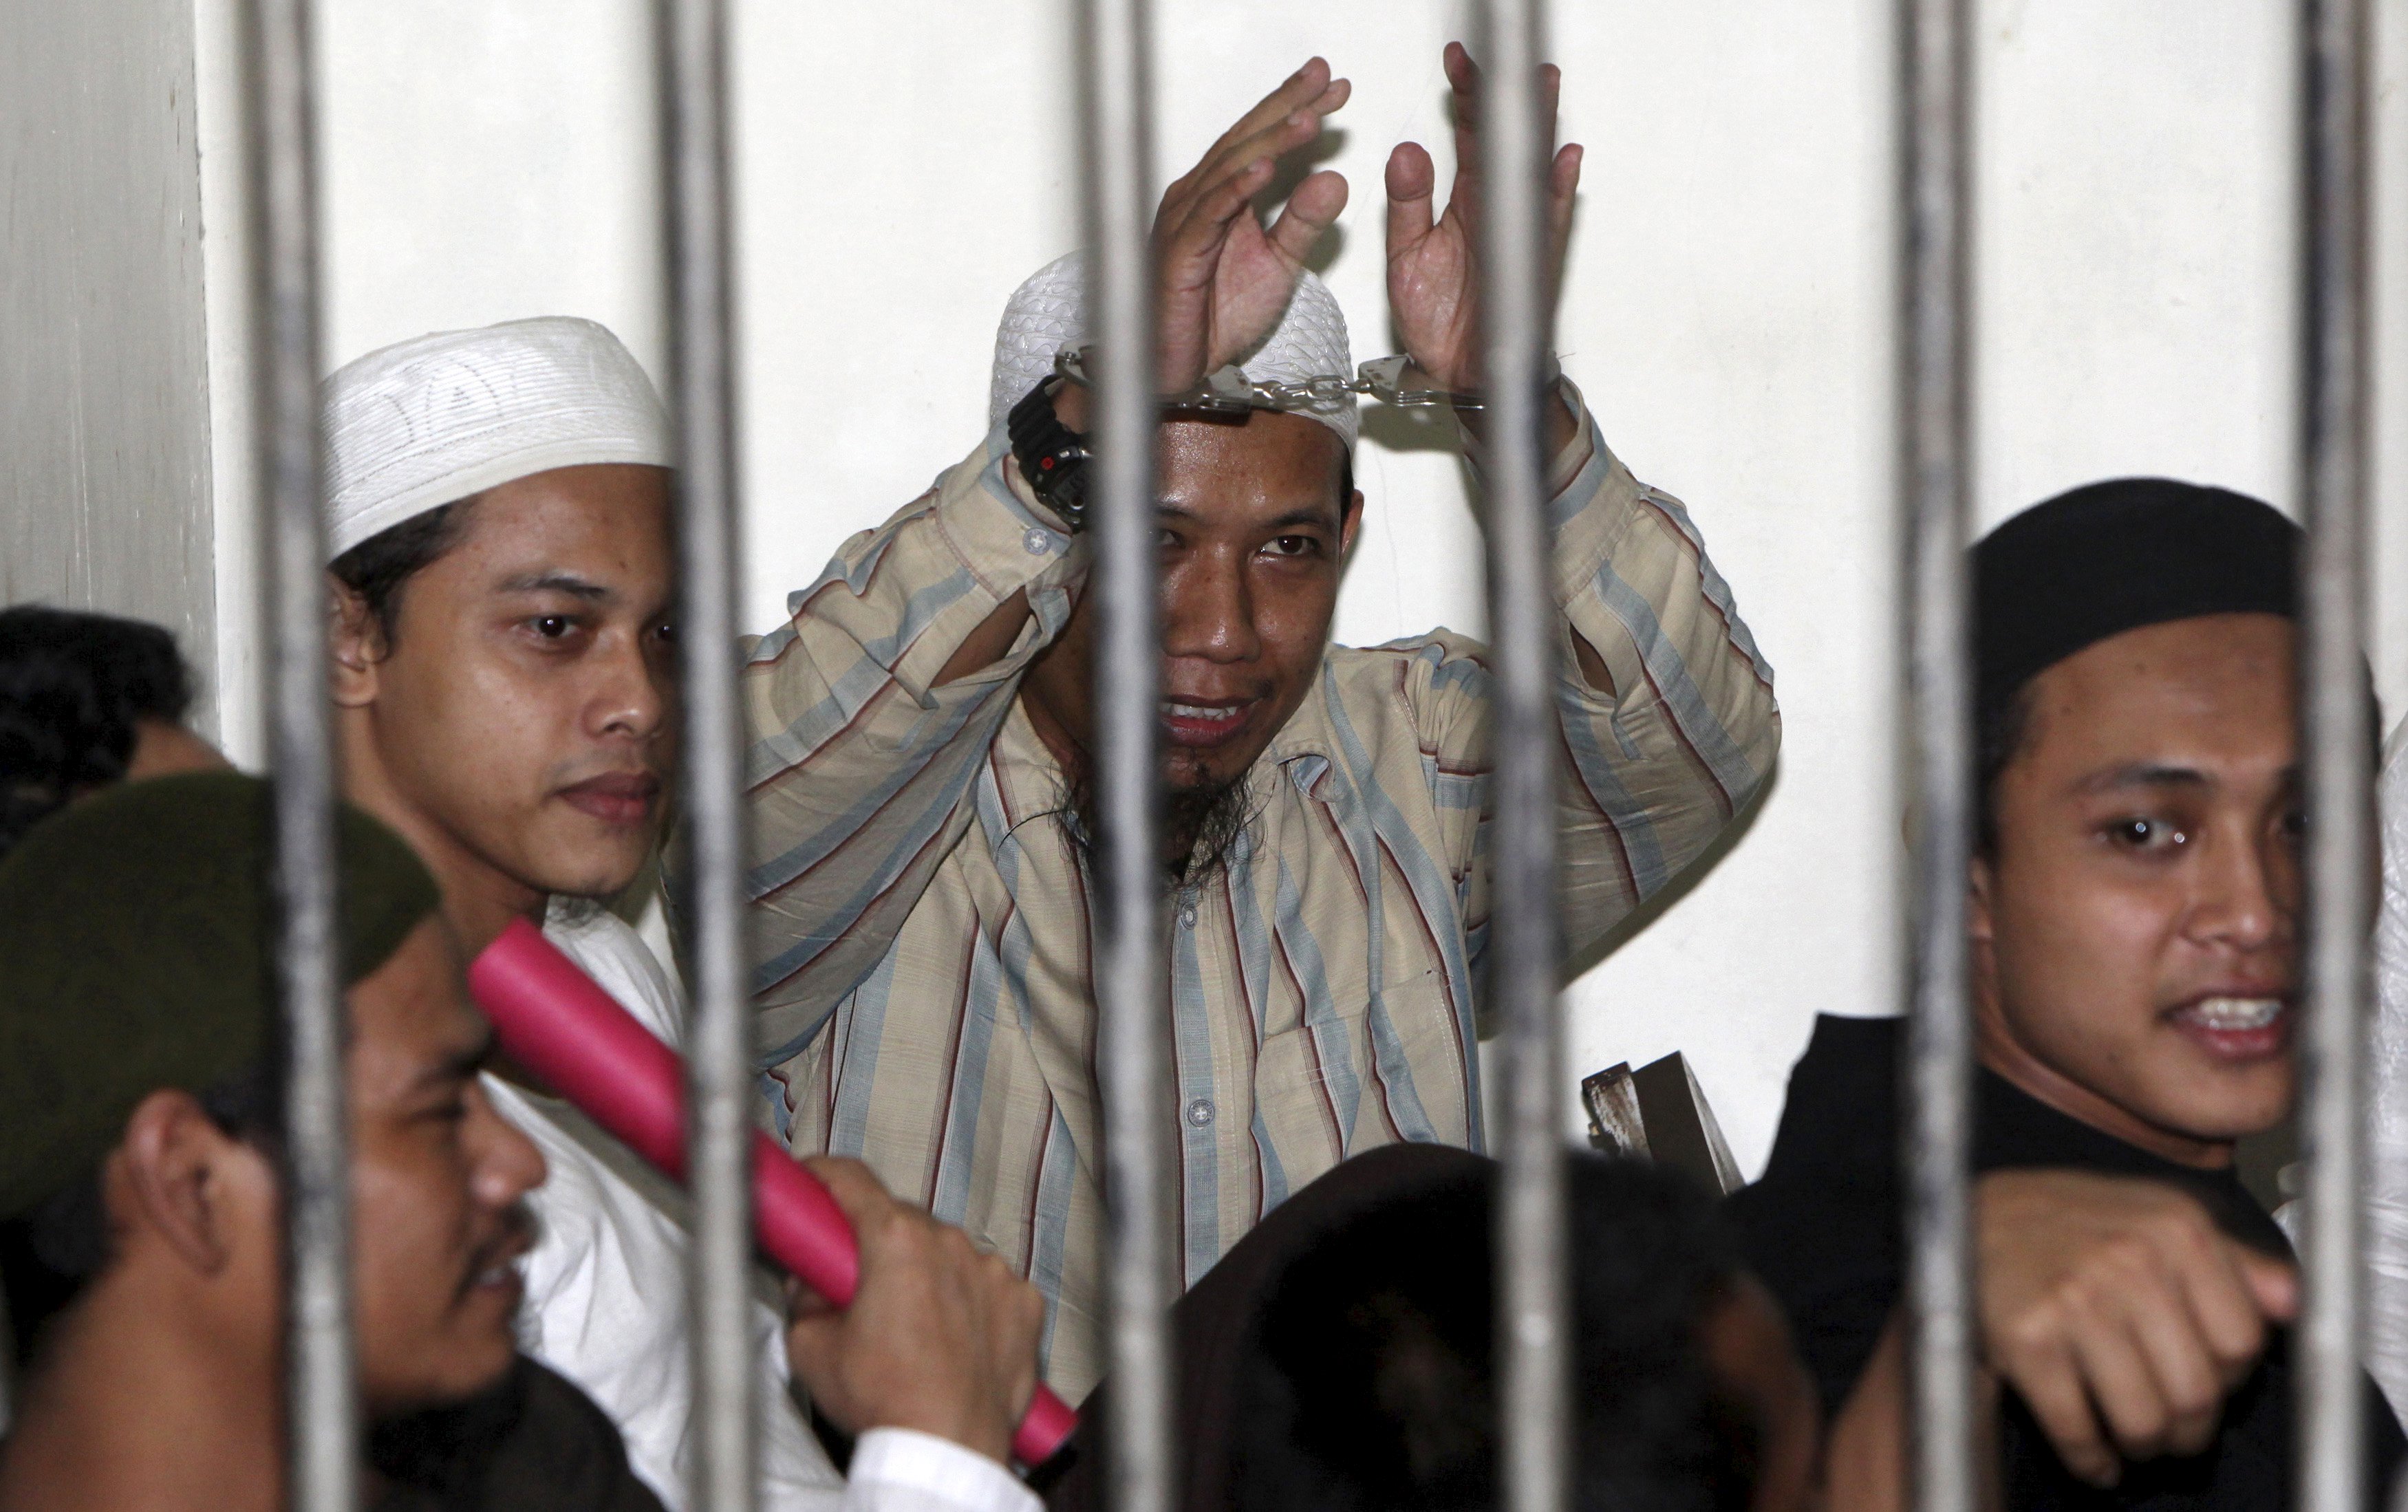 Radical Muslim cleric Aman Abdurrahman (C), also known as Oman Rochman, raises his hands in a holding cell as he waits with other militants for their trial in Jakarta, in this August 26, 2010 file photo. From behind bars, Abdurrahman heads an umbrella organisation formed in 2015 through an alliance of splinter groups that support Islamic State. REUTERS/Dadang Tri/Files